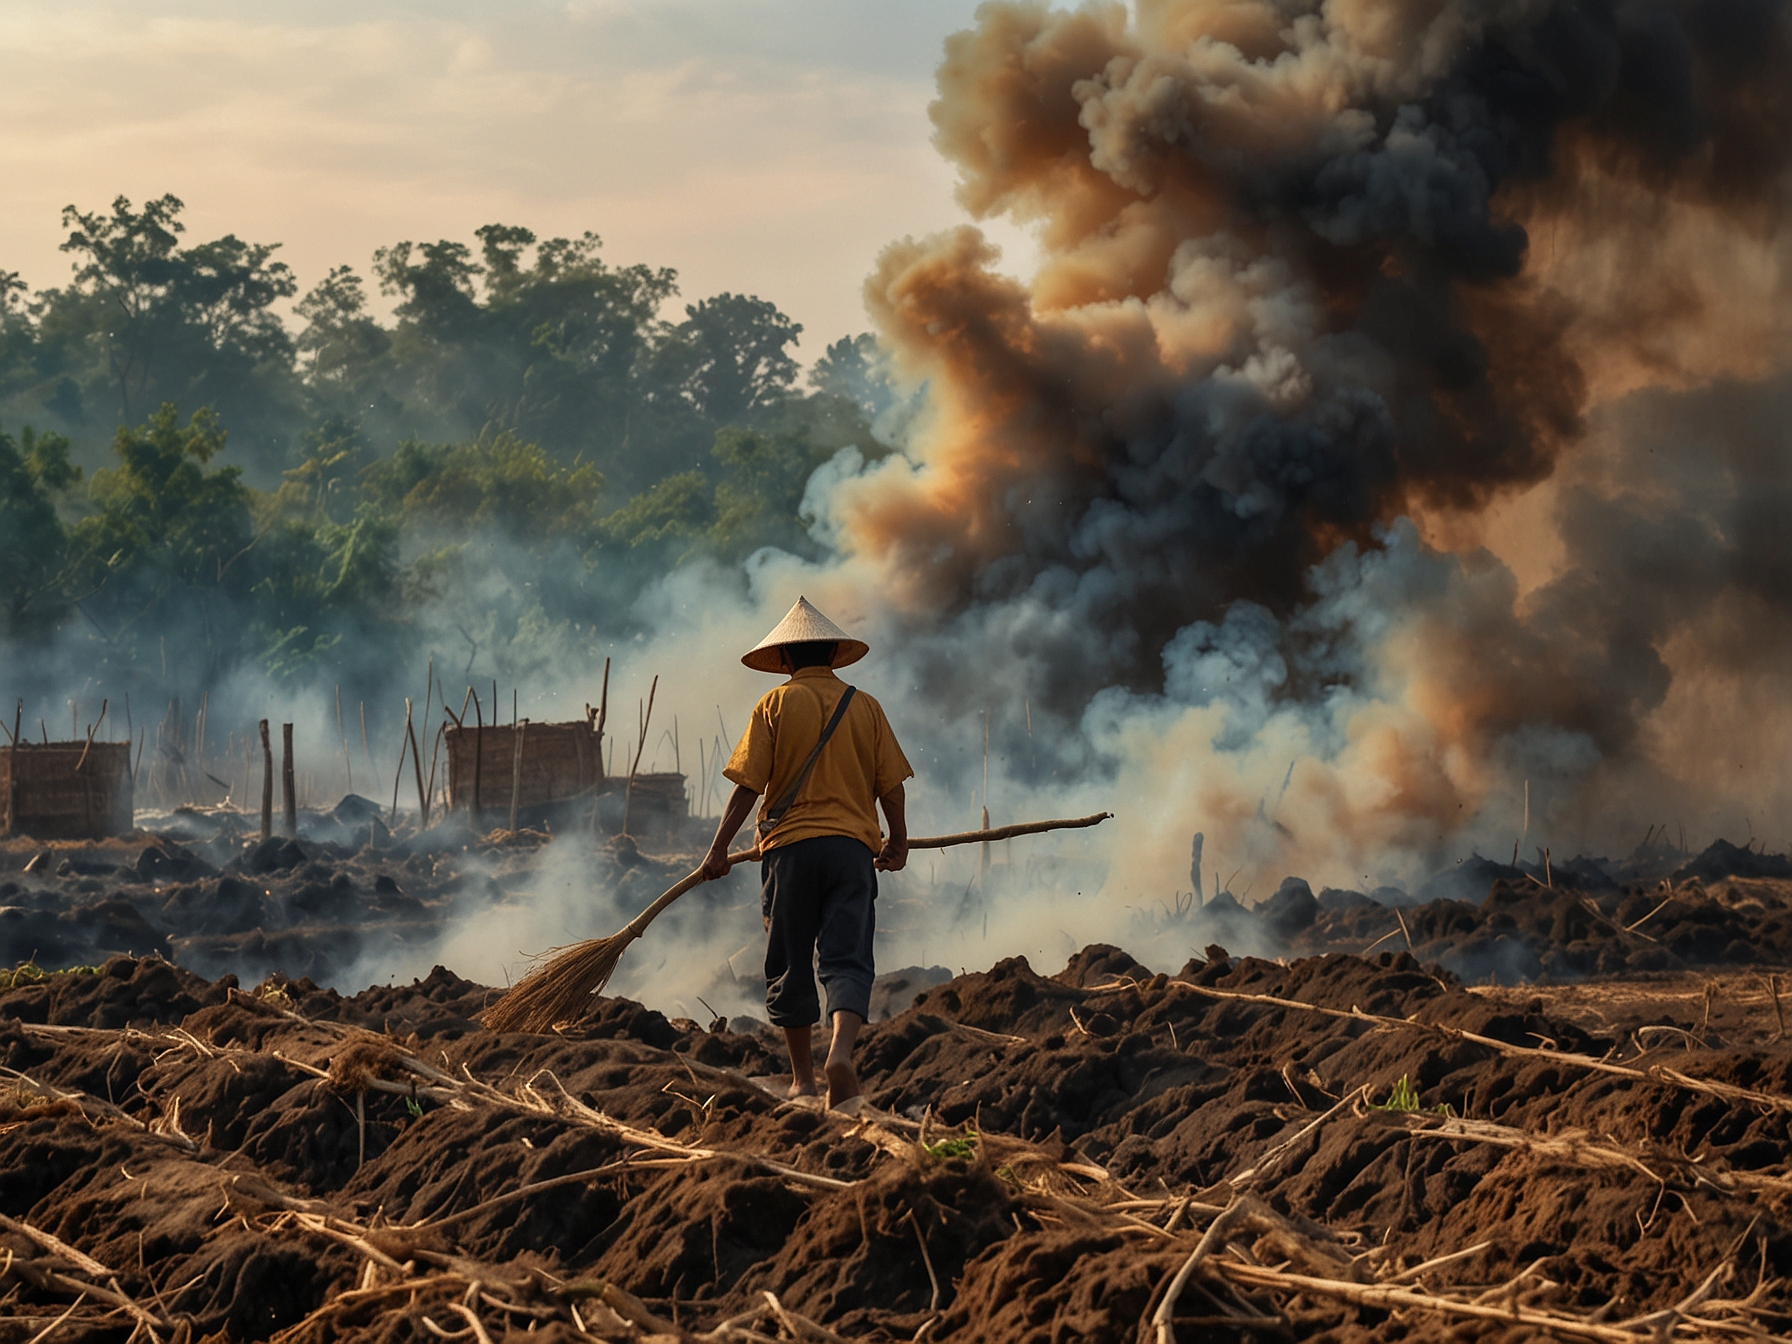 A farmer in Northern Thailand sets fire to crop residues, creating thick smoke that lowers air quality, a common practice during the haze season contributing to severe pollution.